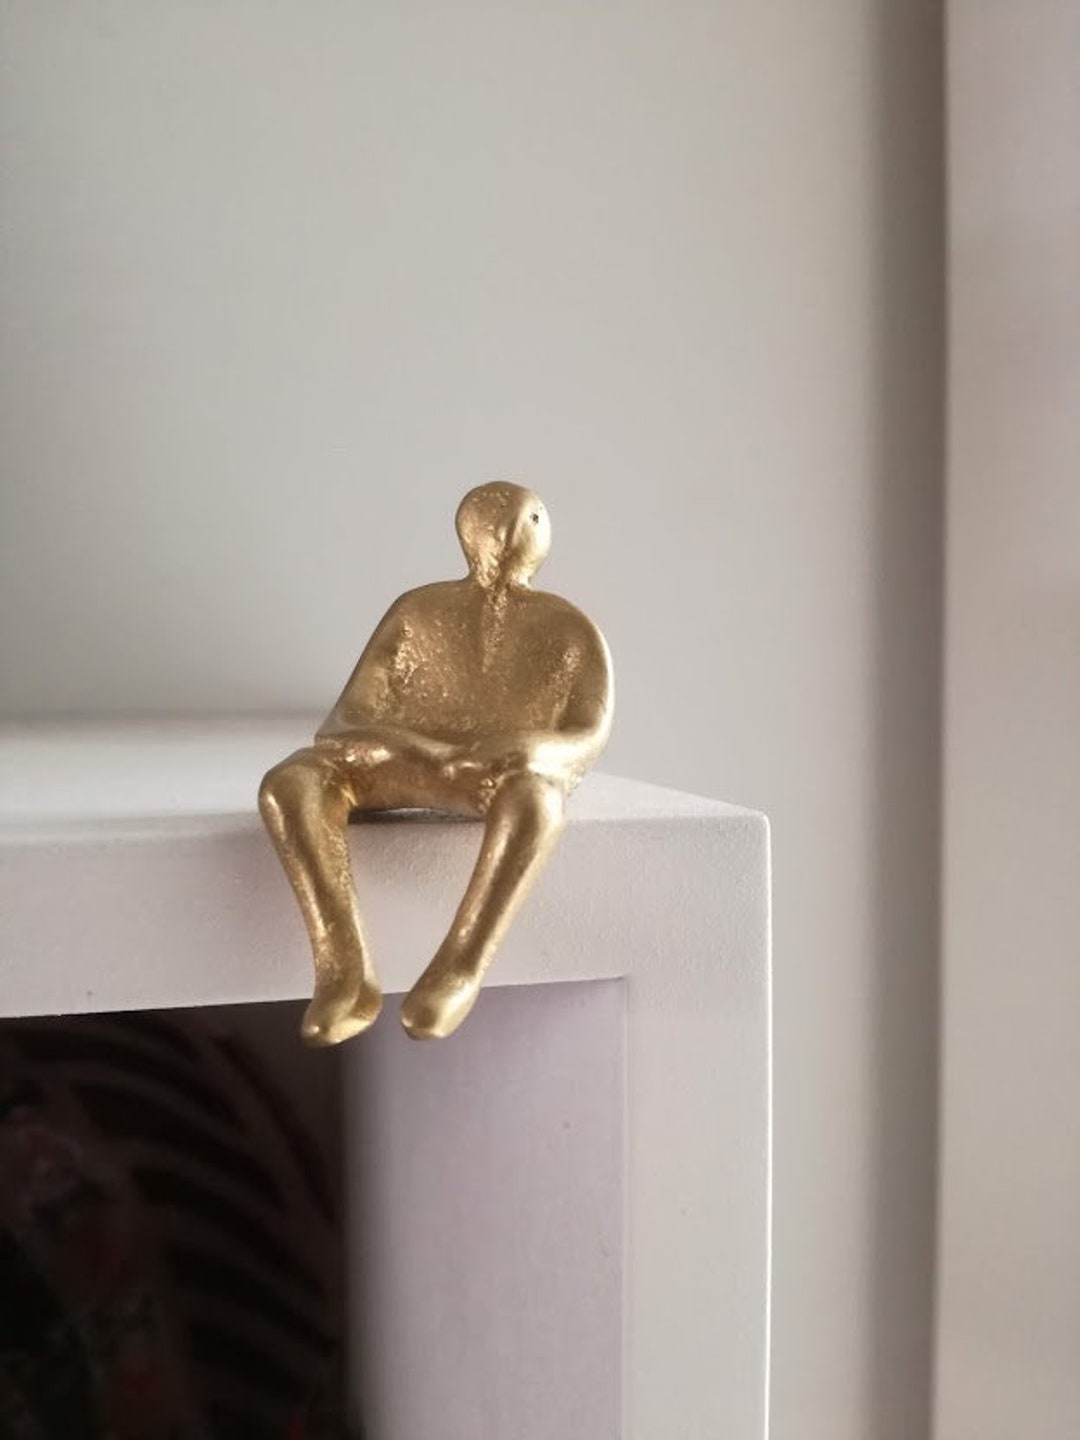 Seated Man Figure, Brass Sculpture of Sitting Man, Little Figure Sculpture  Perched on the Edge of a Shelf, Oxidised Brass, Tiny Figurine 